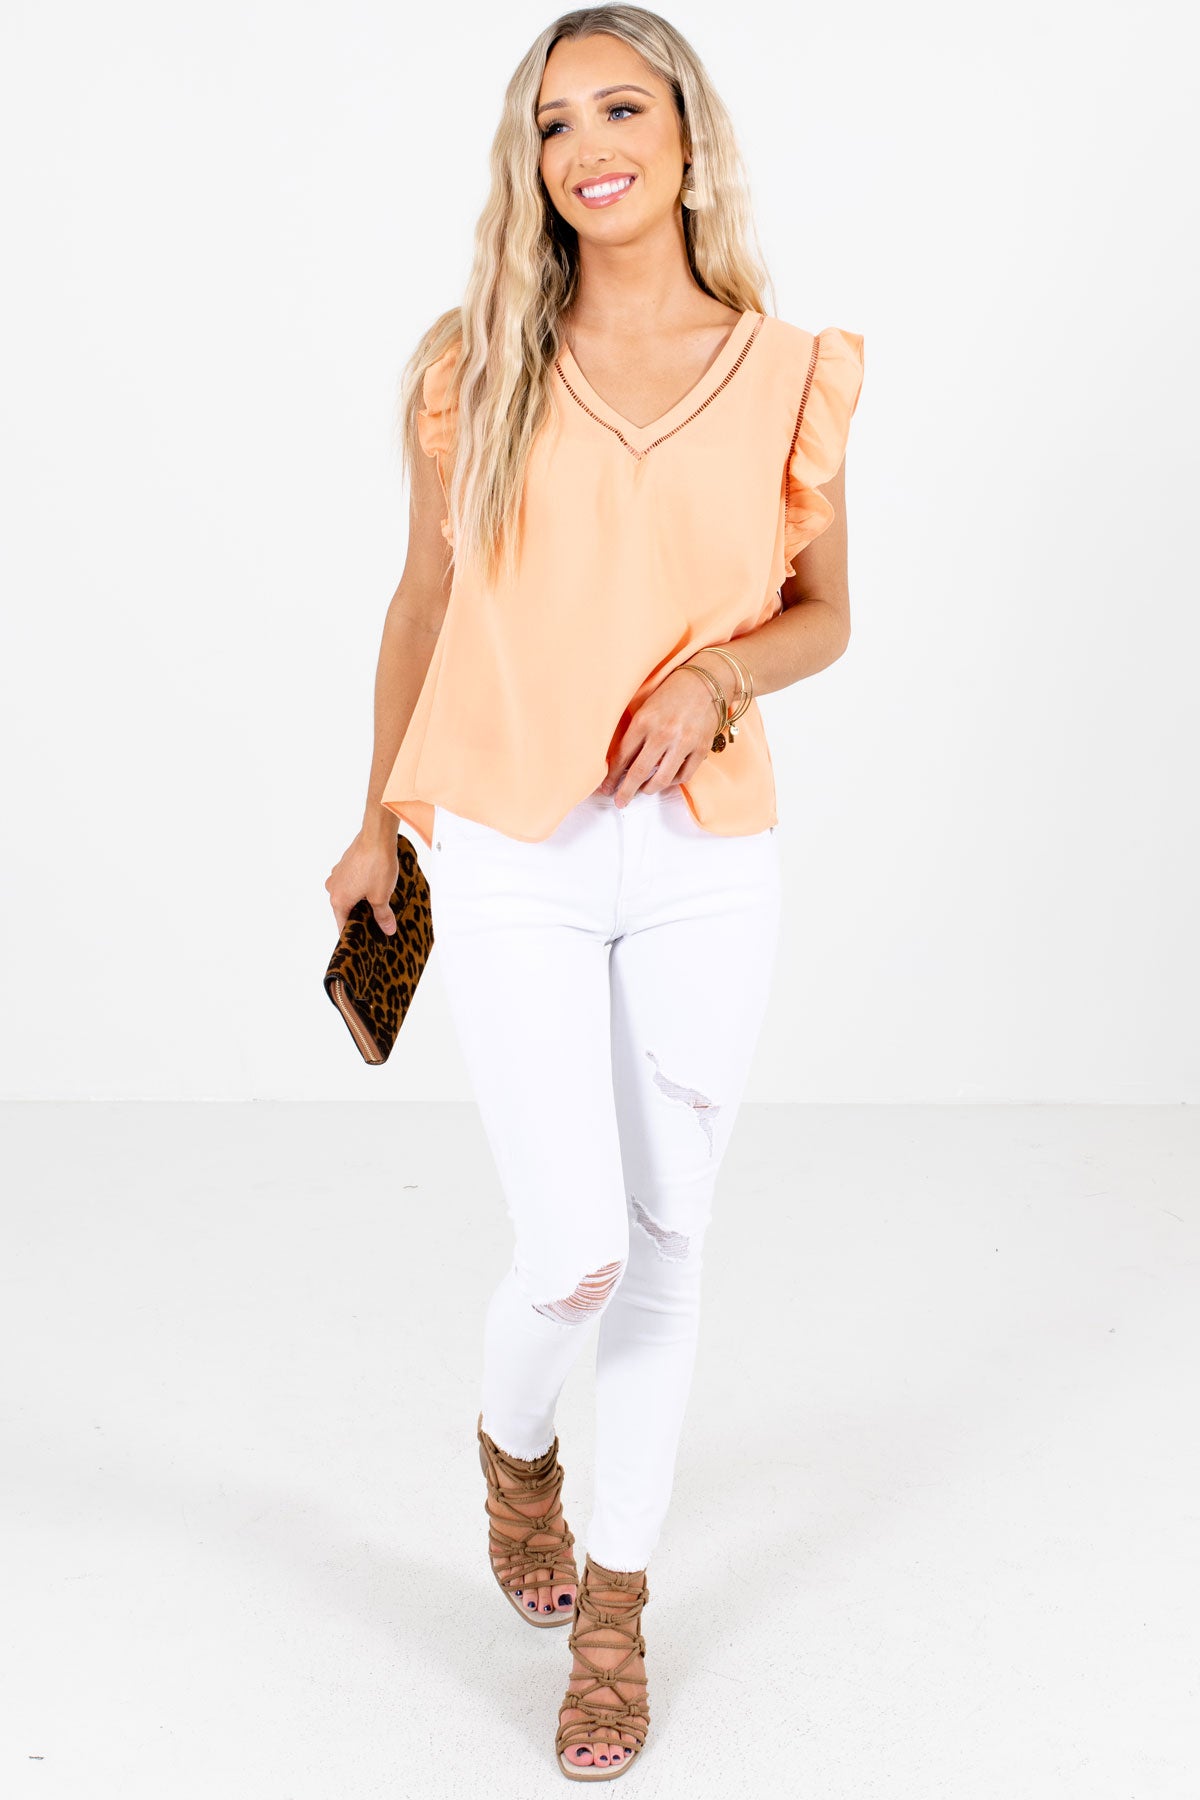 Orange Cute and Comfortable Boutique Tank Tops for Women